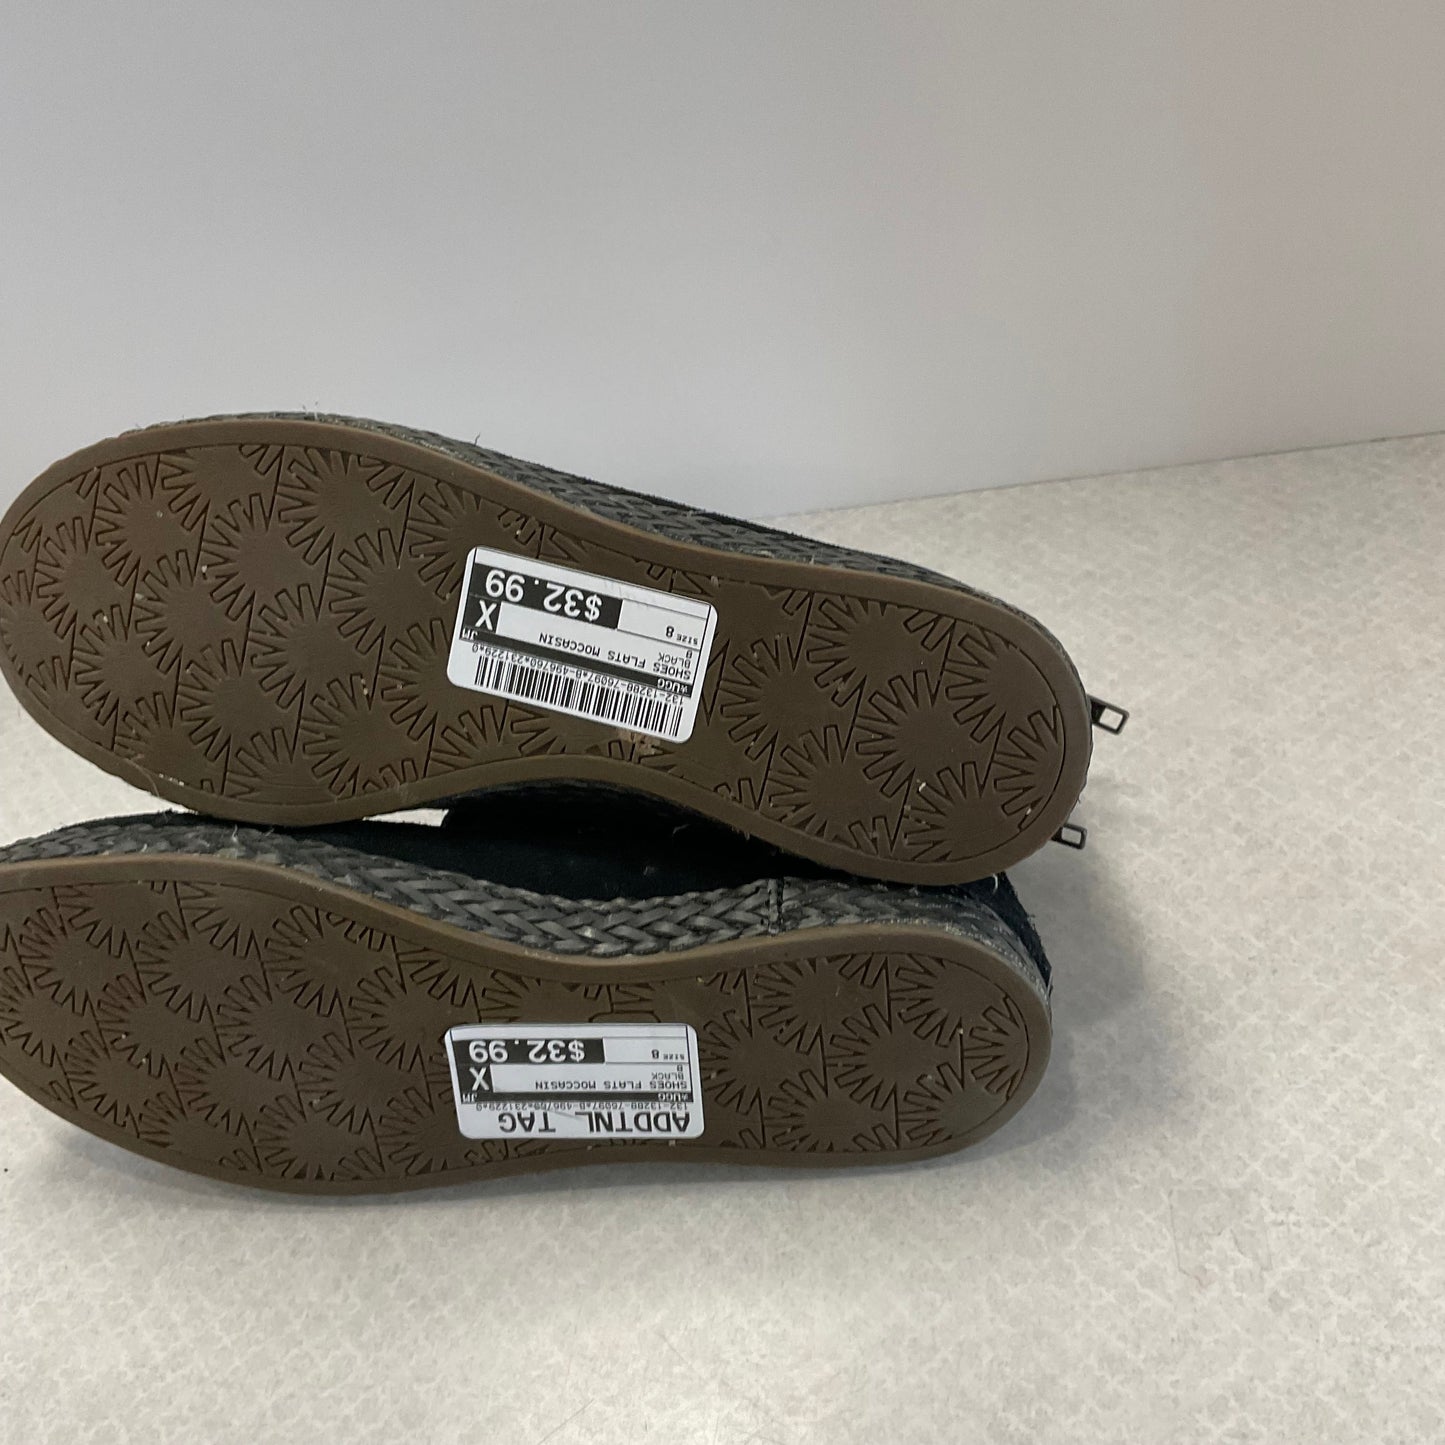 Shoes Flats Moccasin By Ugg  Size: 8